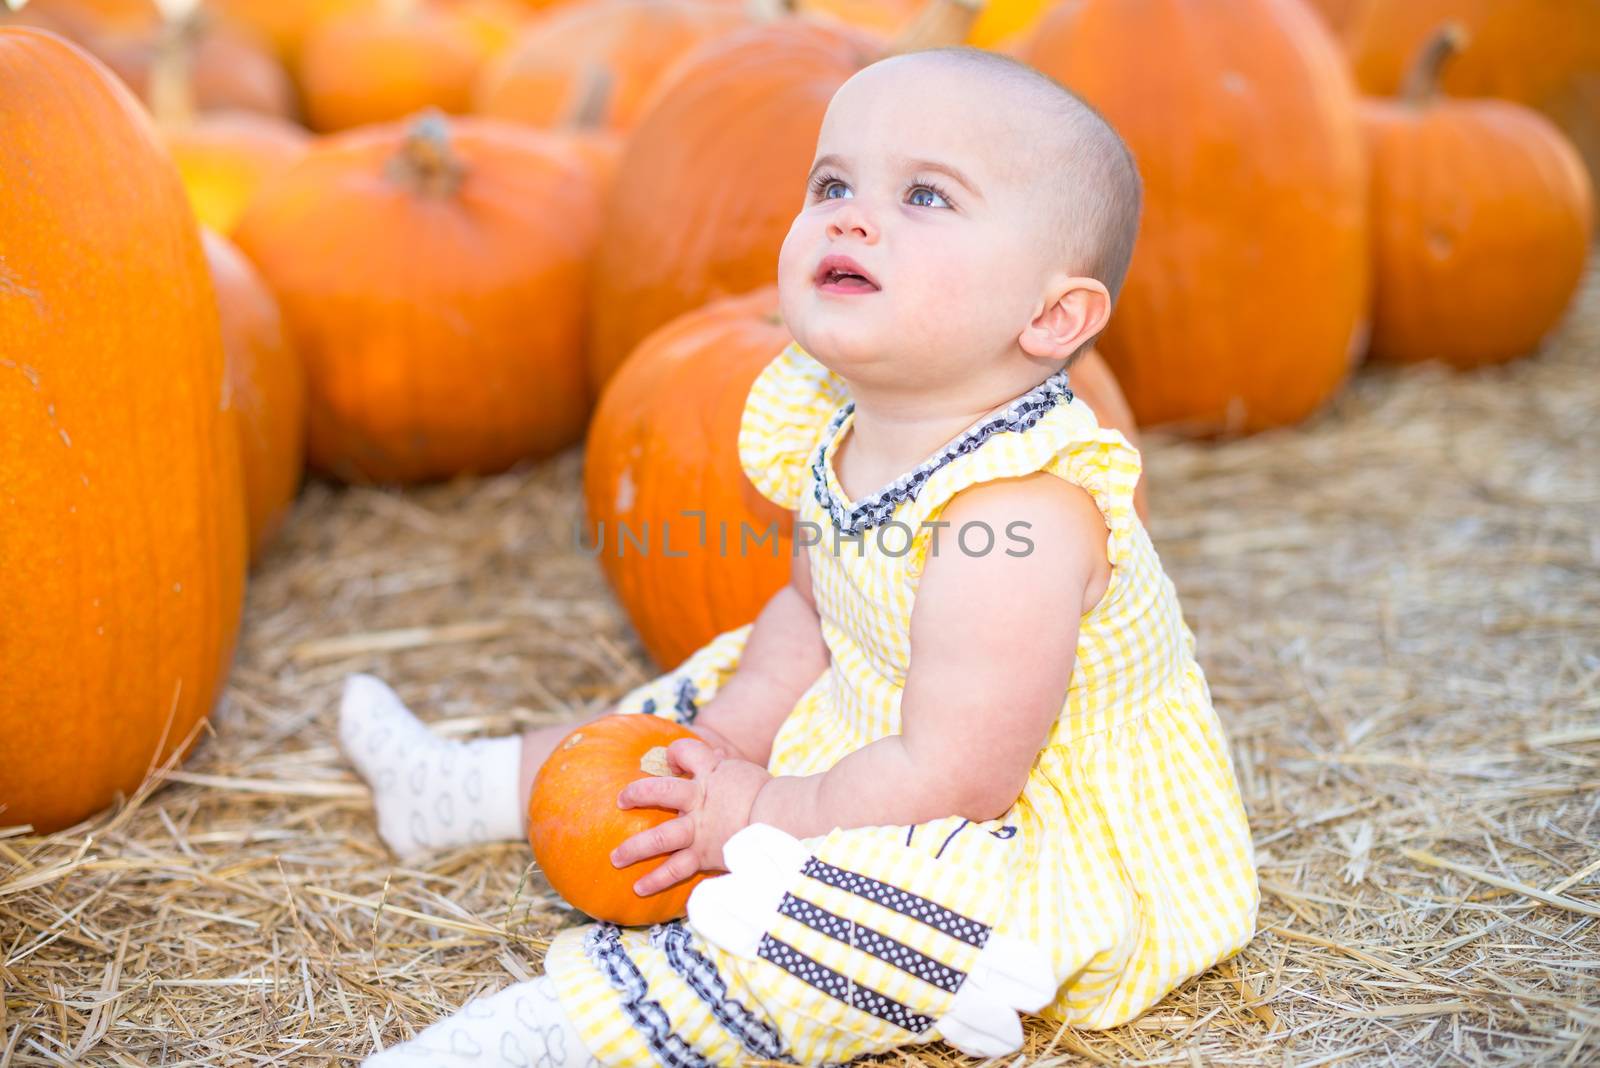 Cute Baby girl sitting on hay in a Pumpkin Patch